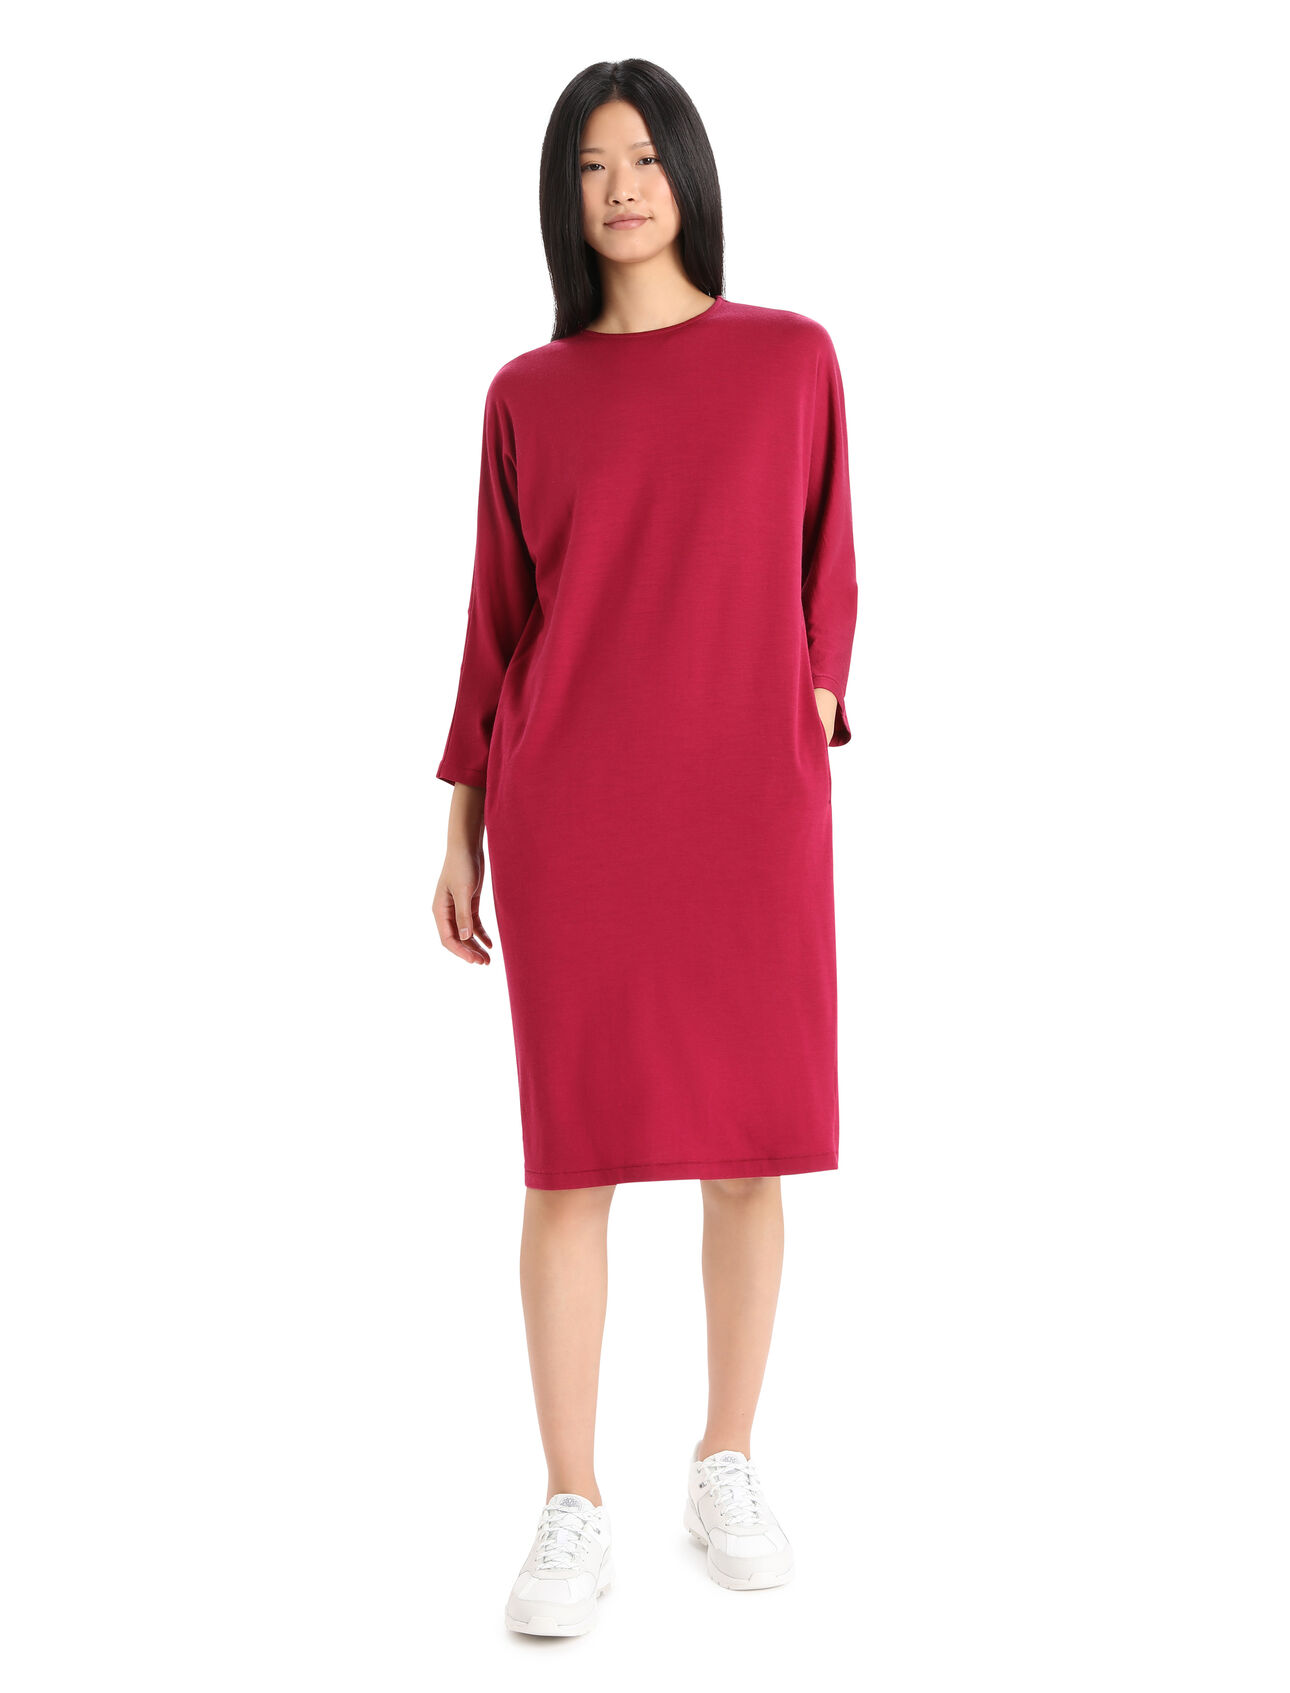 Womens Merino Oasis Long Sleeve Dress A clean, simple and flattering dress made with our best-selling, 100% merino jersey fabric, the Oasis Long Sleeve Dress features a relaxed fit for maximum style and comfort around town.